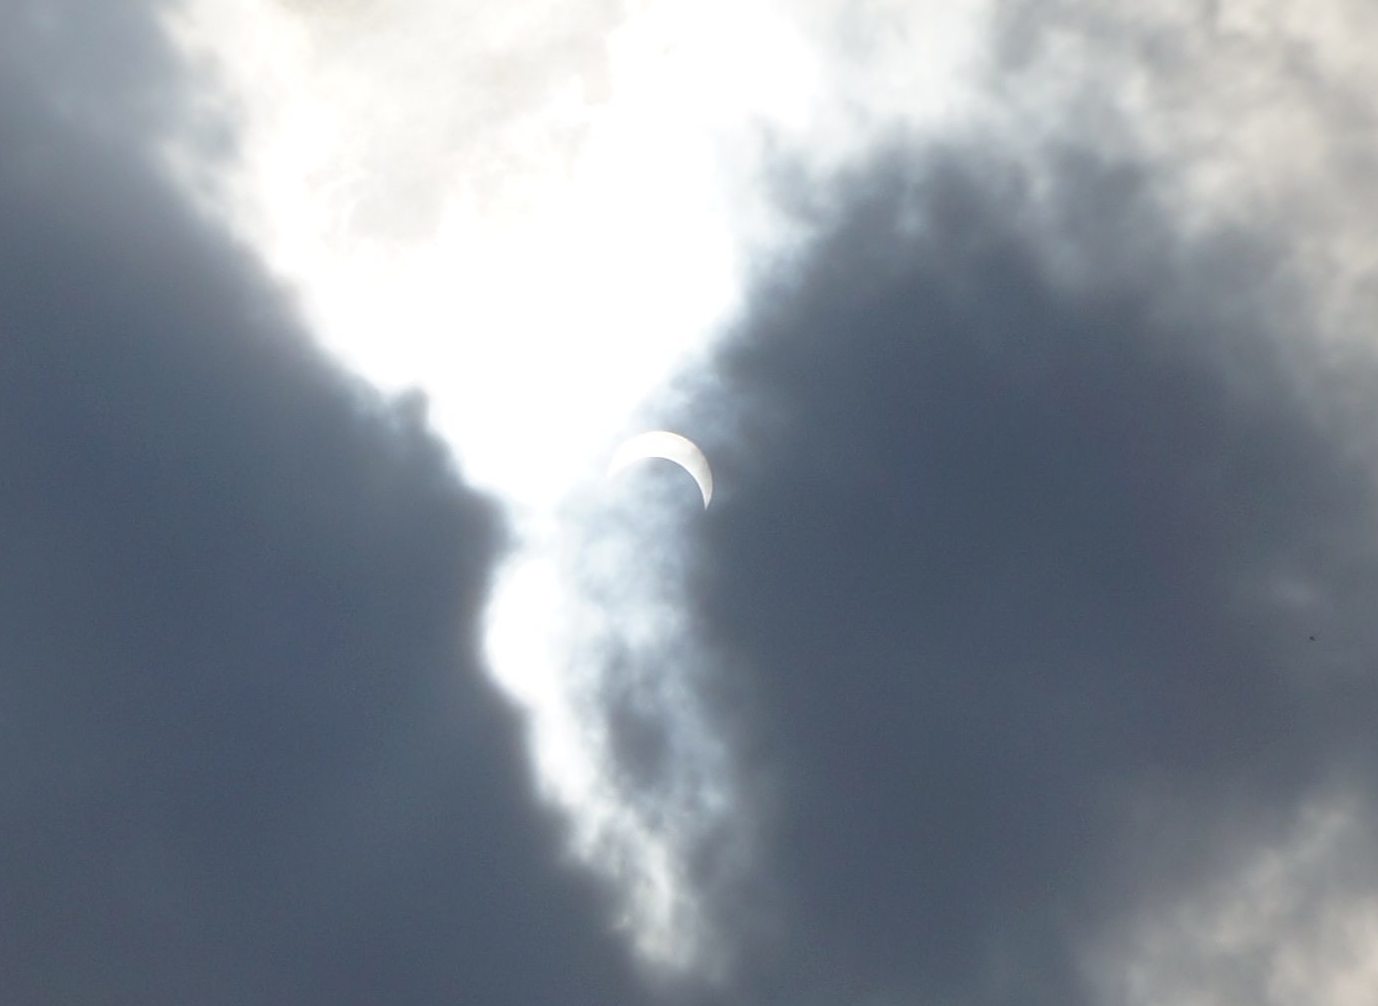 Full Eclipse Of The Sun In Nigeria (Picture) Science/Technology (7